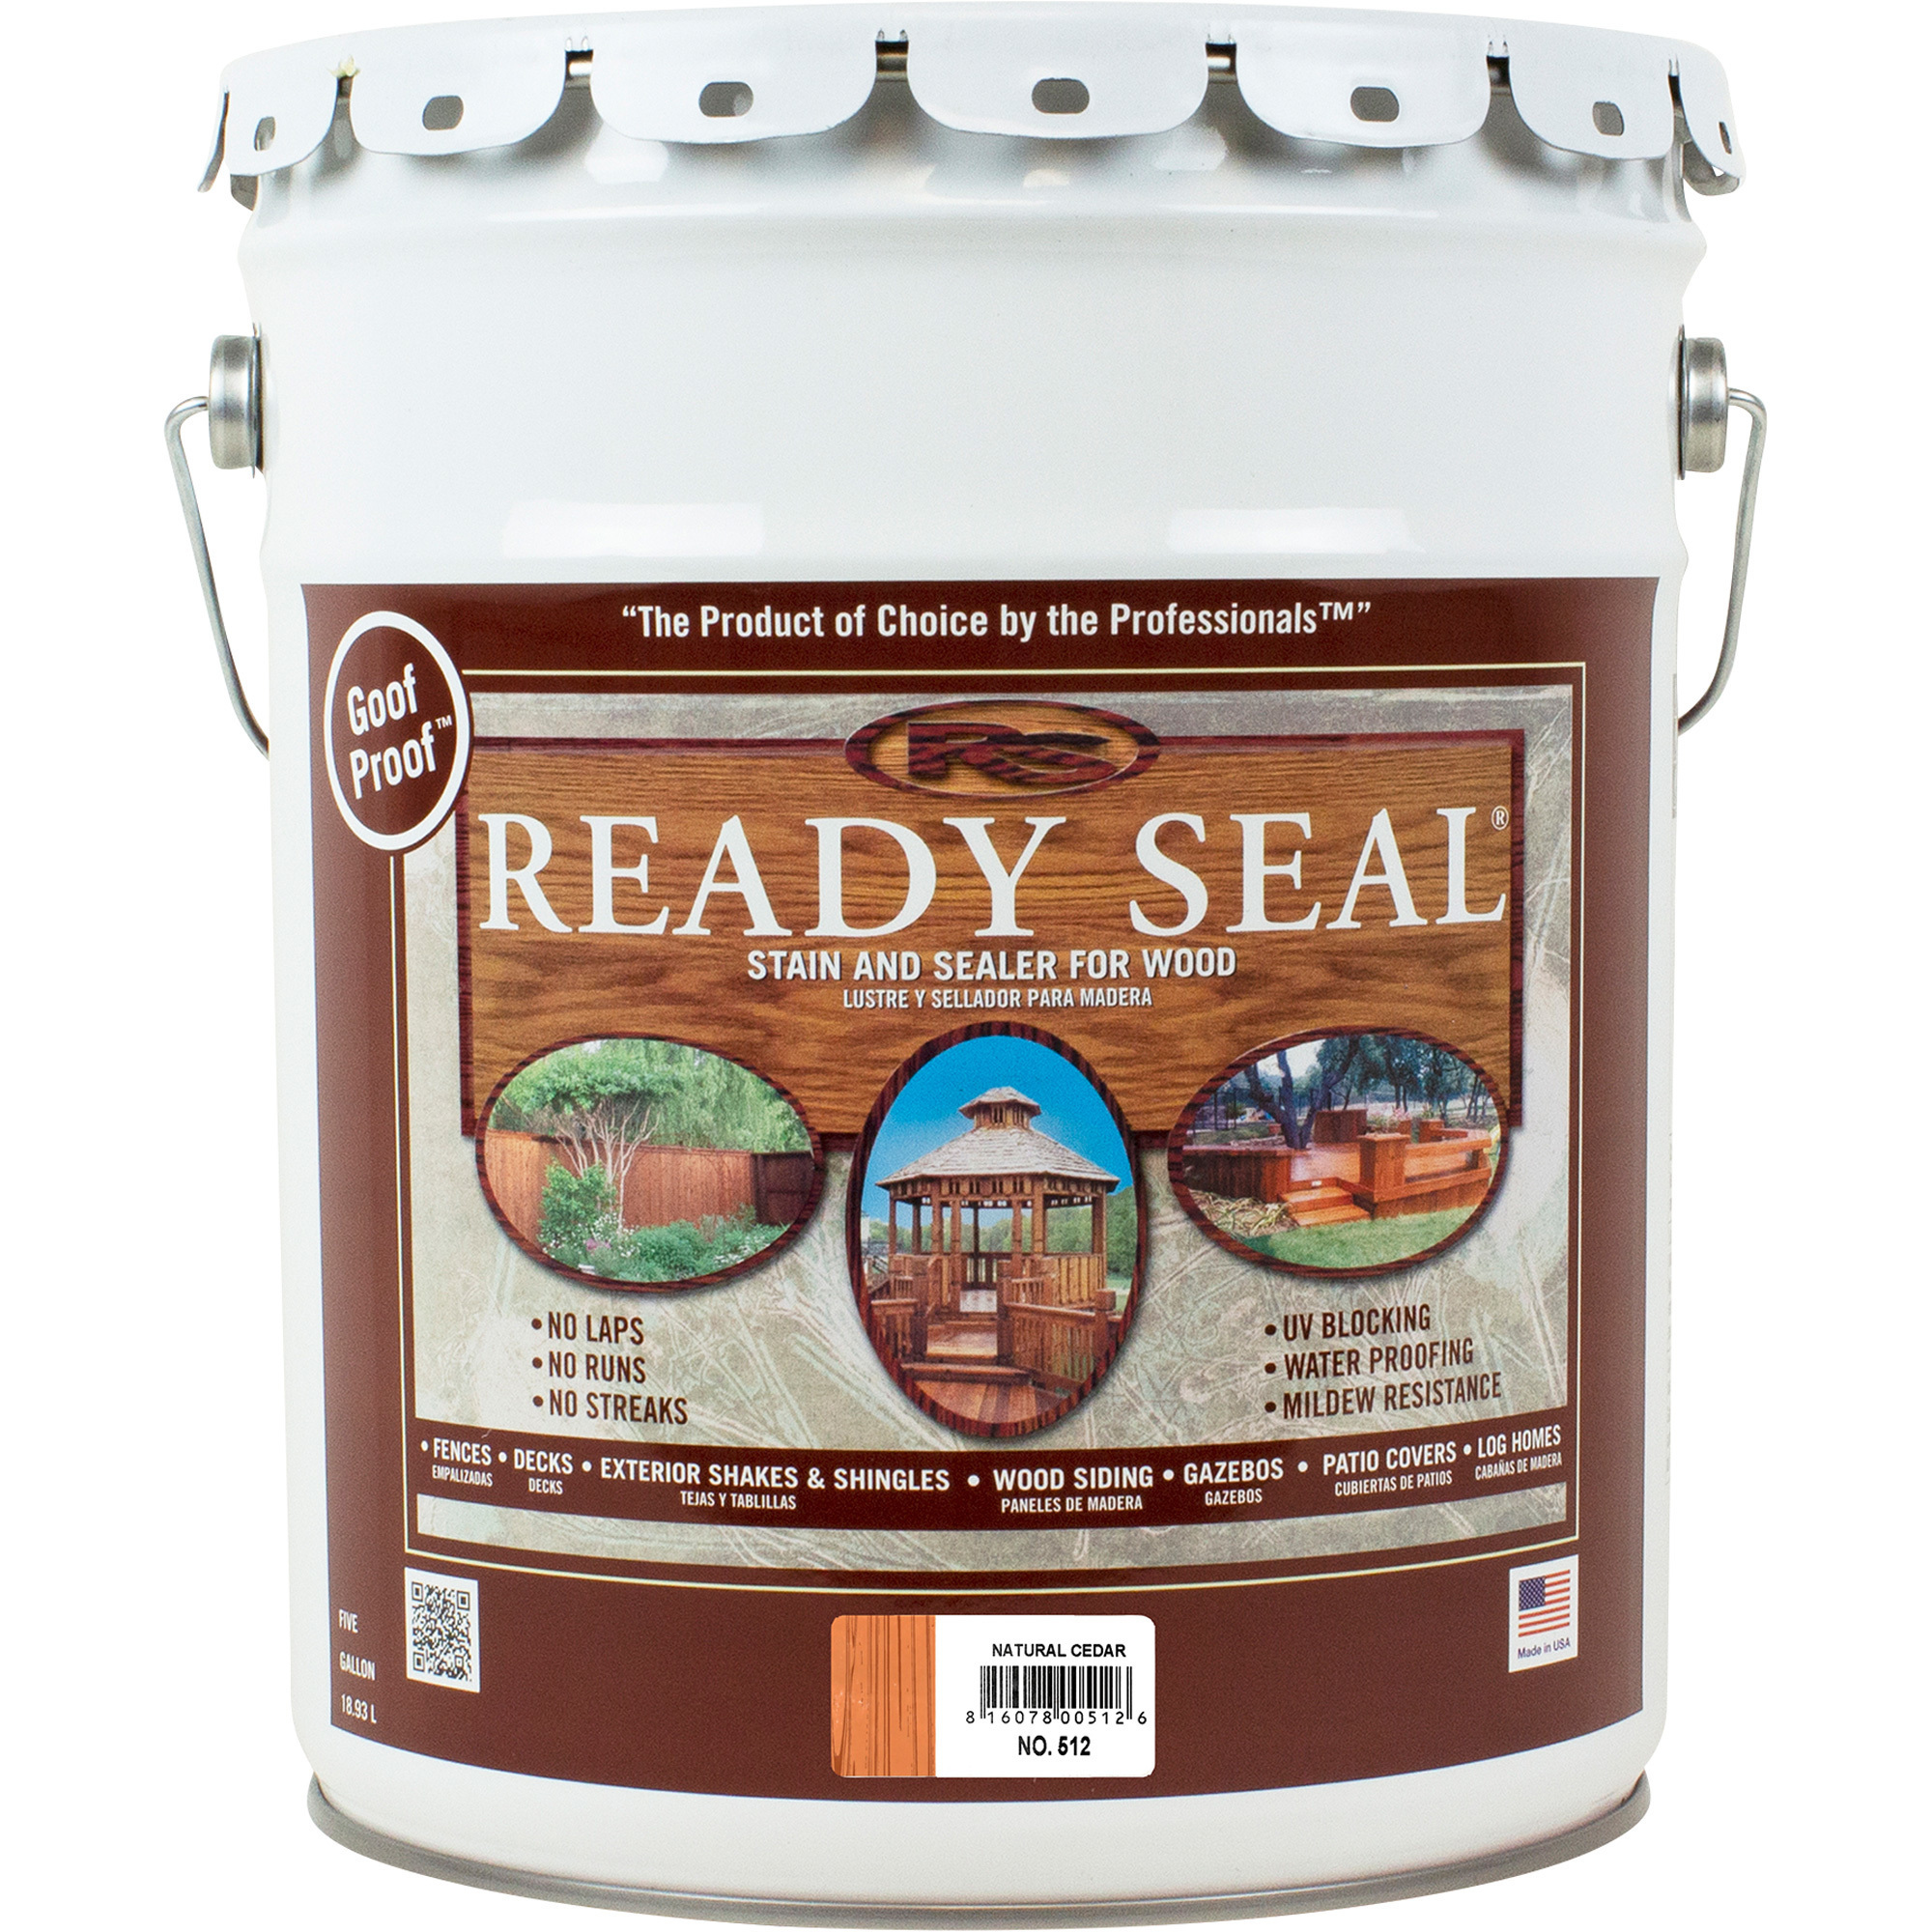 Ready Seal Exterior Wood Stain and Sealer, Natural Cedar, 5 Gallons, Model 512